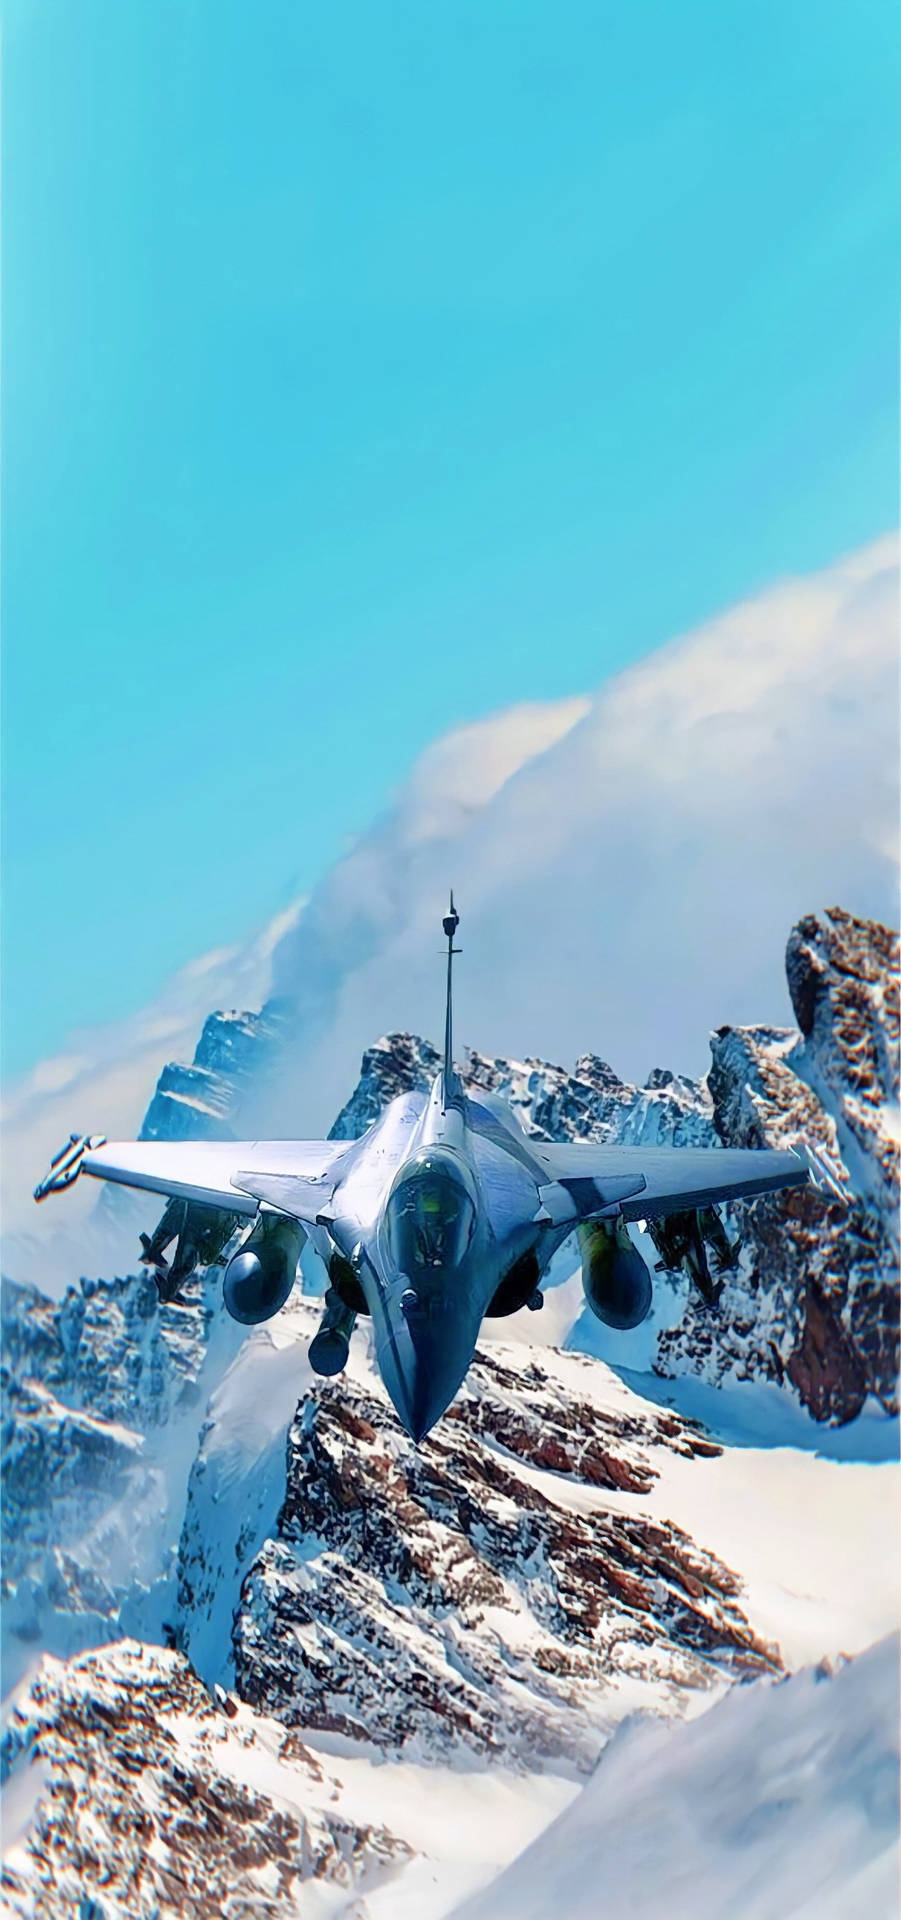 An Epic Shot Of A Fighter Jet Over Snow Capped Mountains As Wallpaper For Iphone